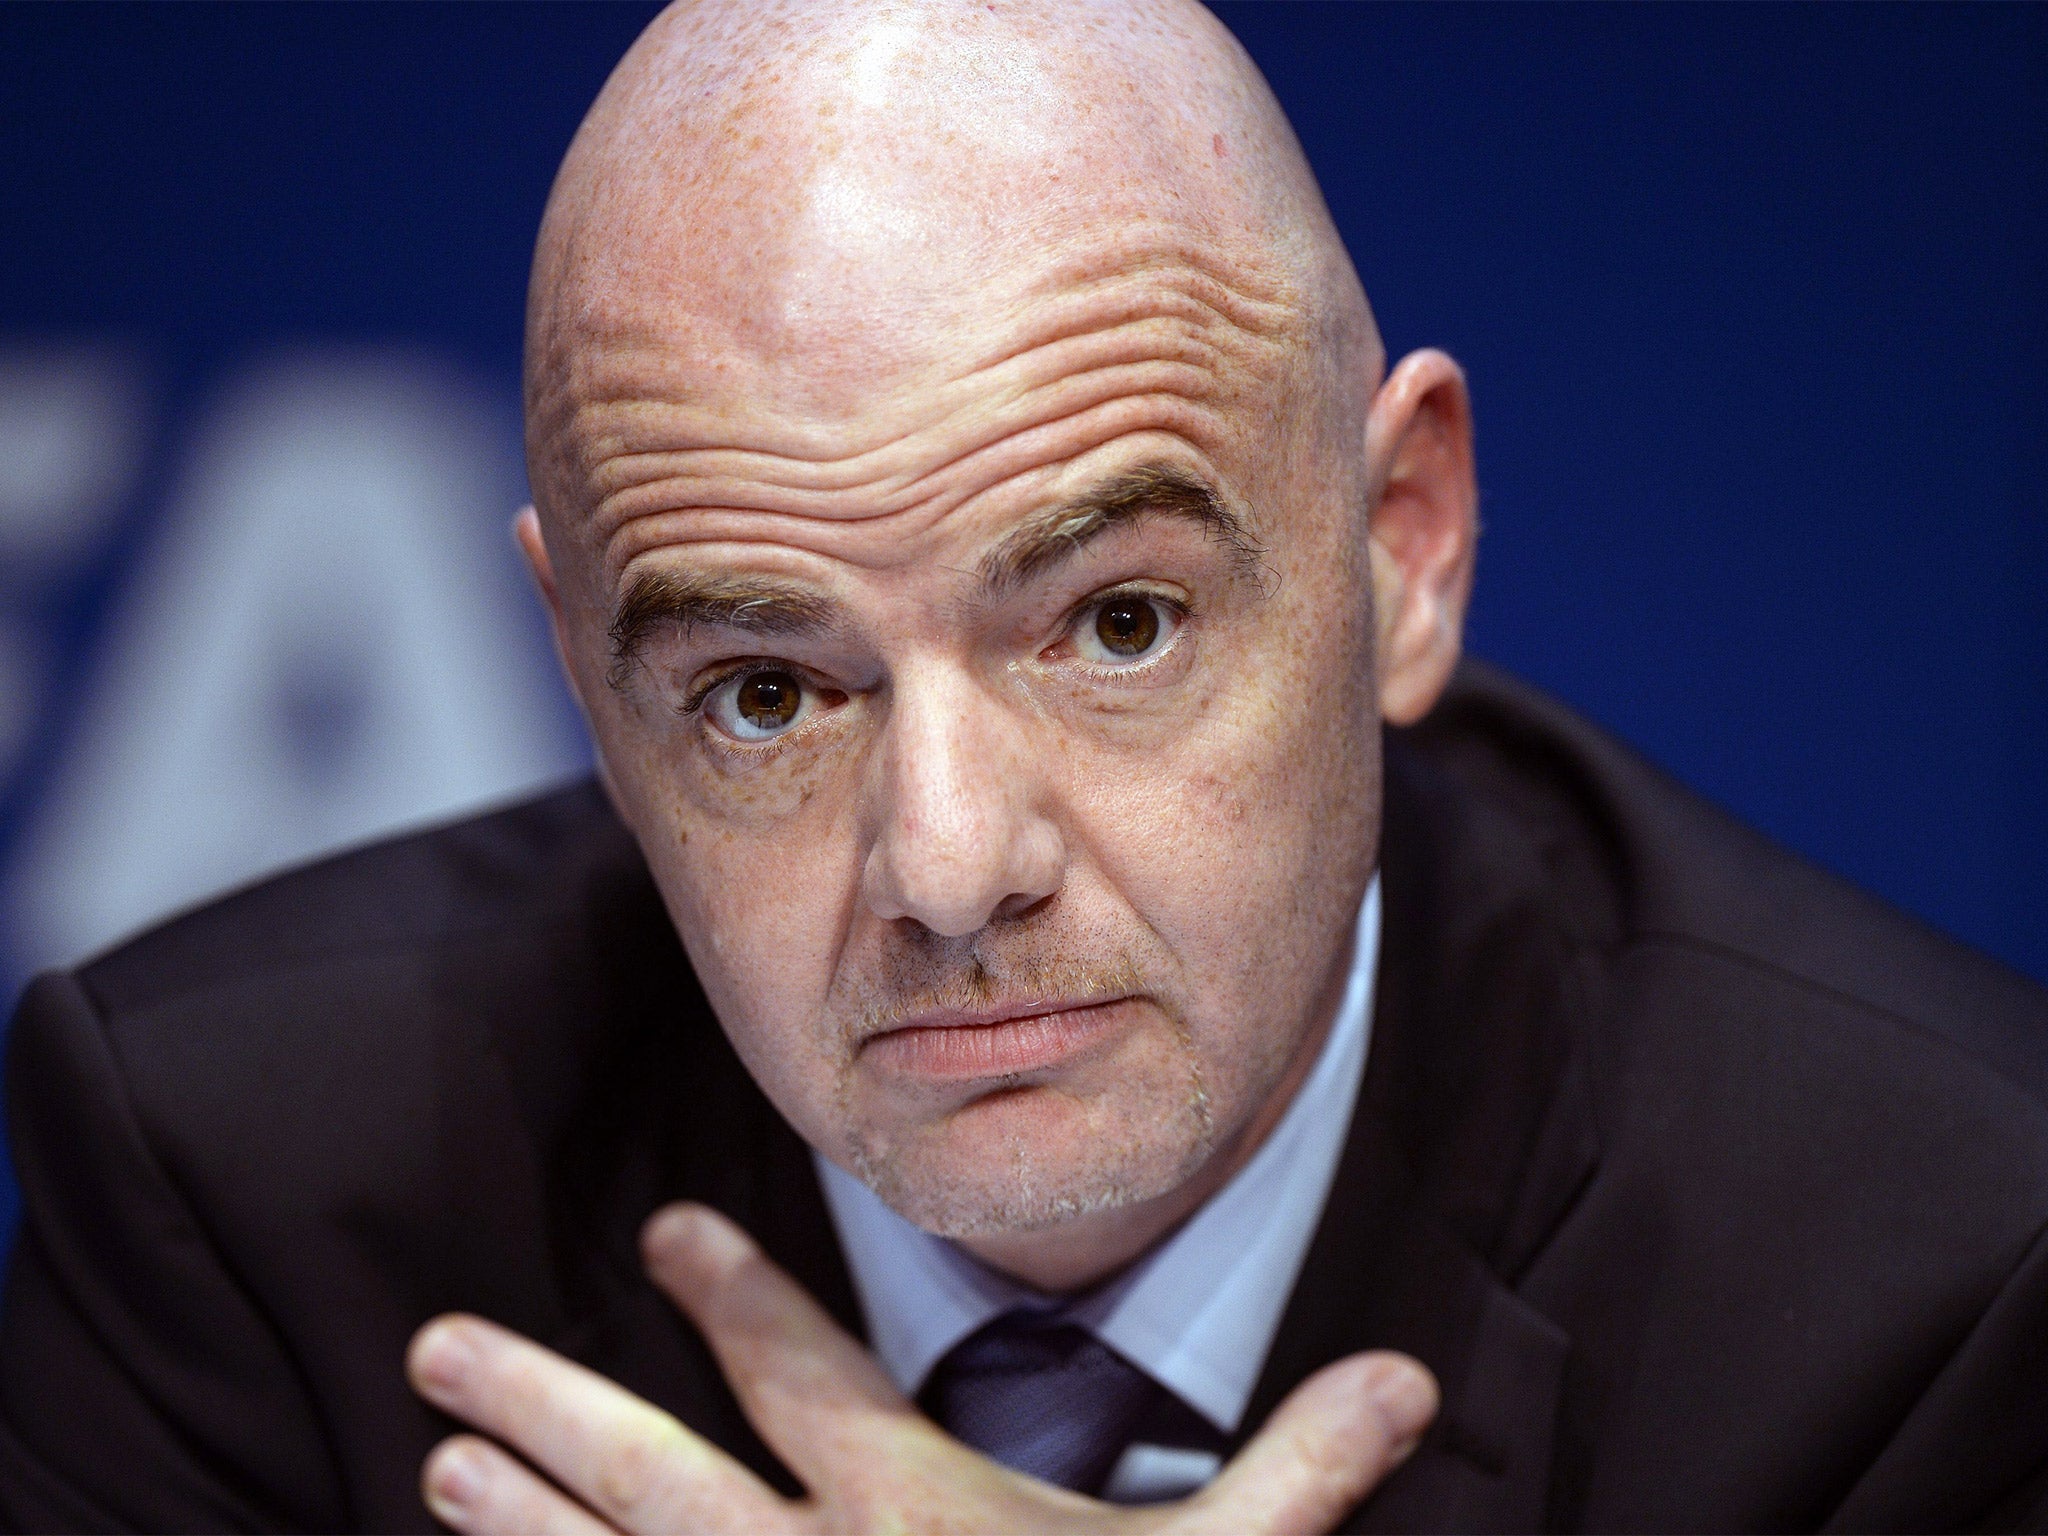 Gianni Infantino faces the first challenge to his Fifa presidency (Getty)